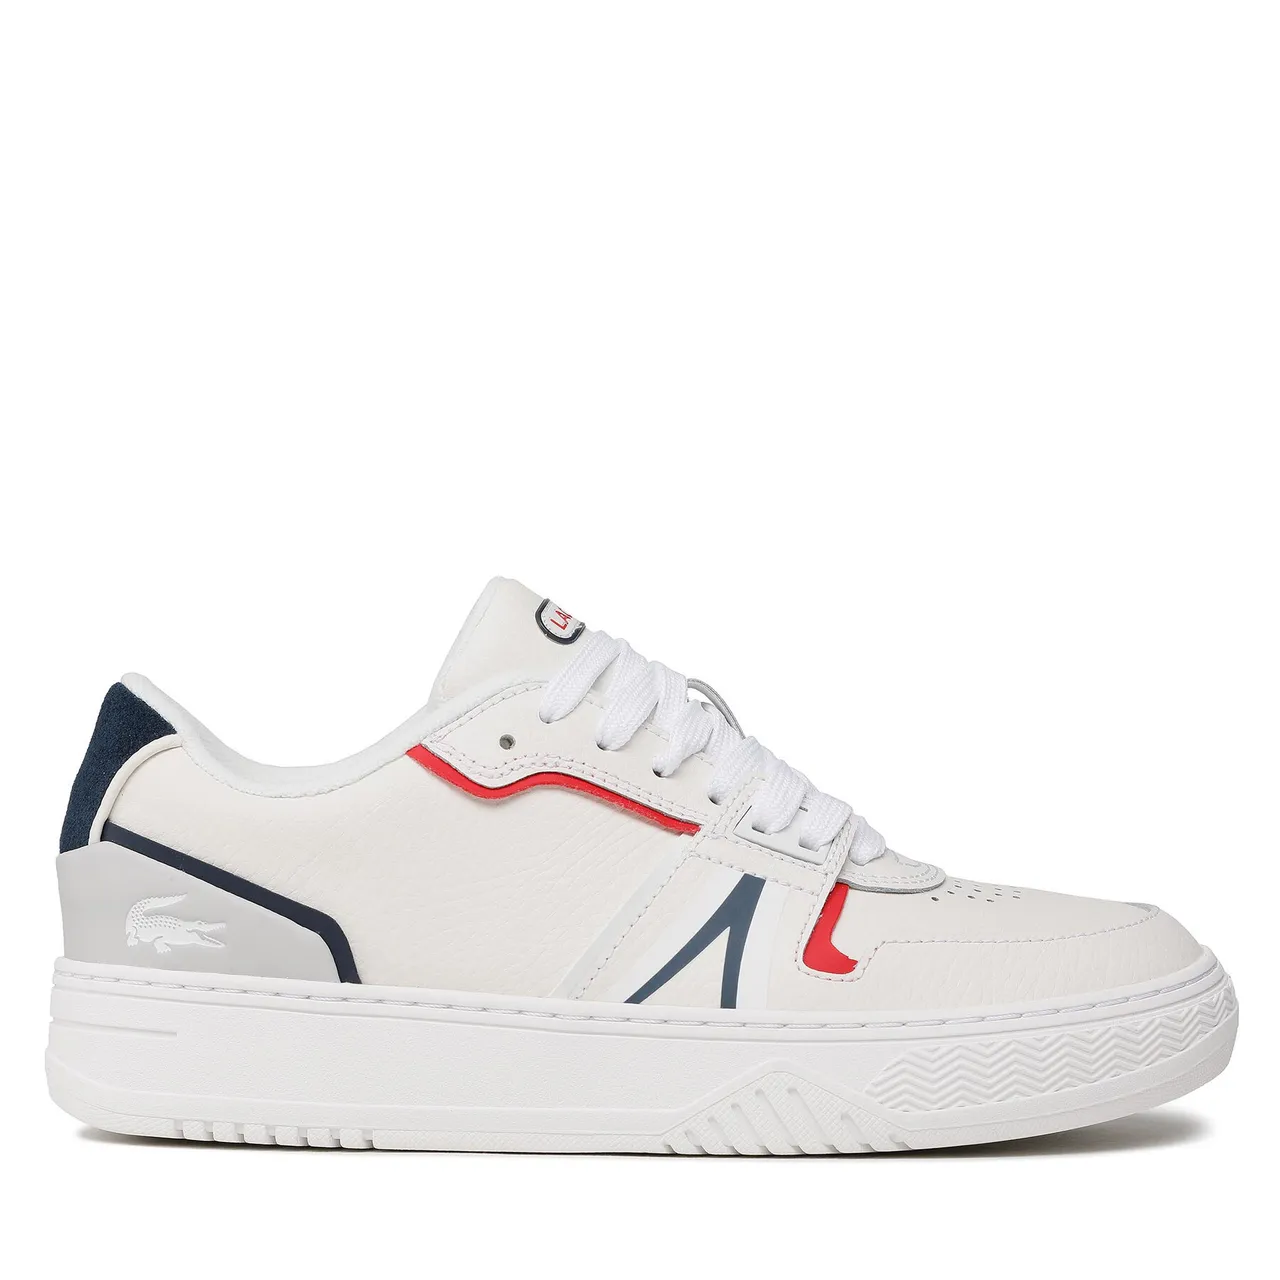 Sneakers Lacoste L001 0321 1 Sma 7-42SMA0092407 Wht/Nvy/Red